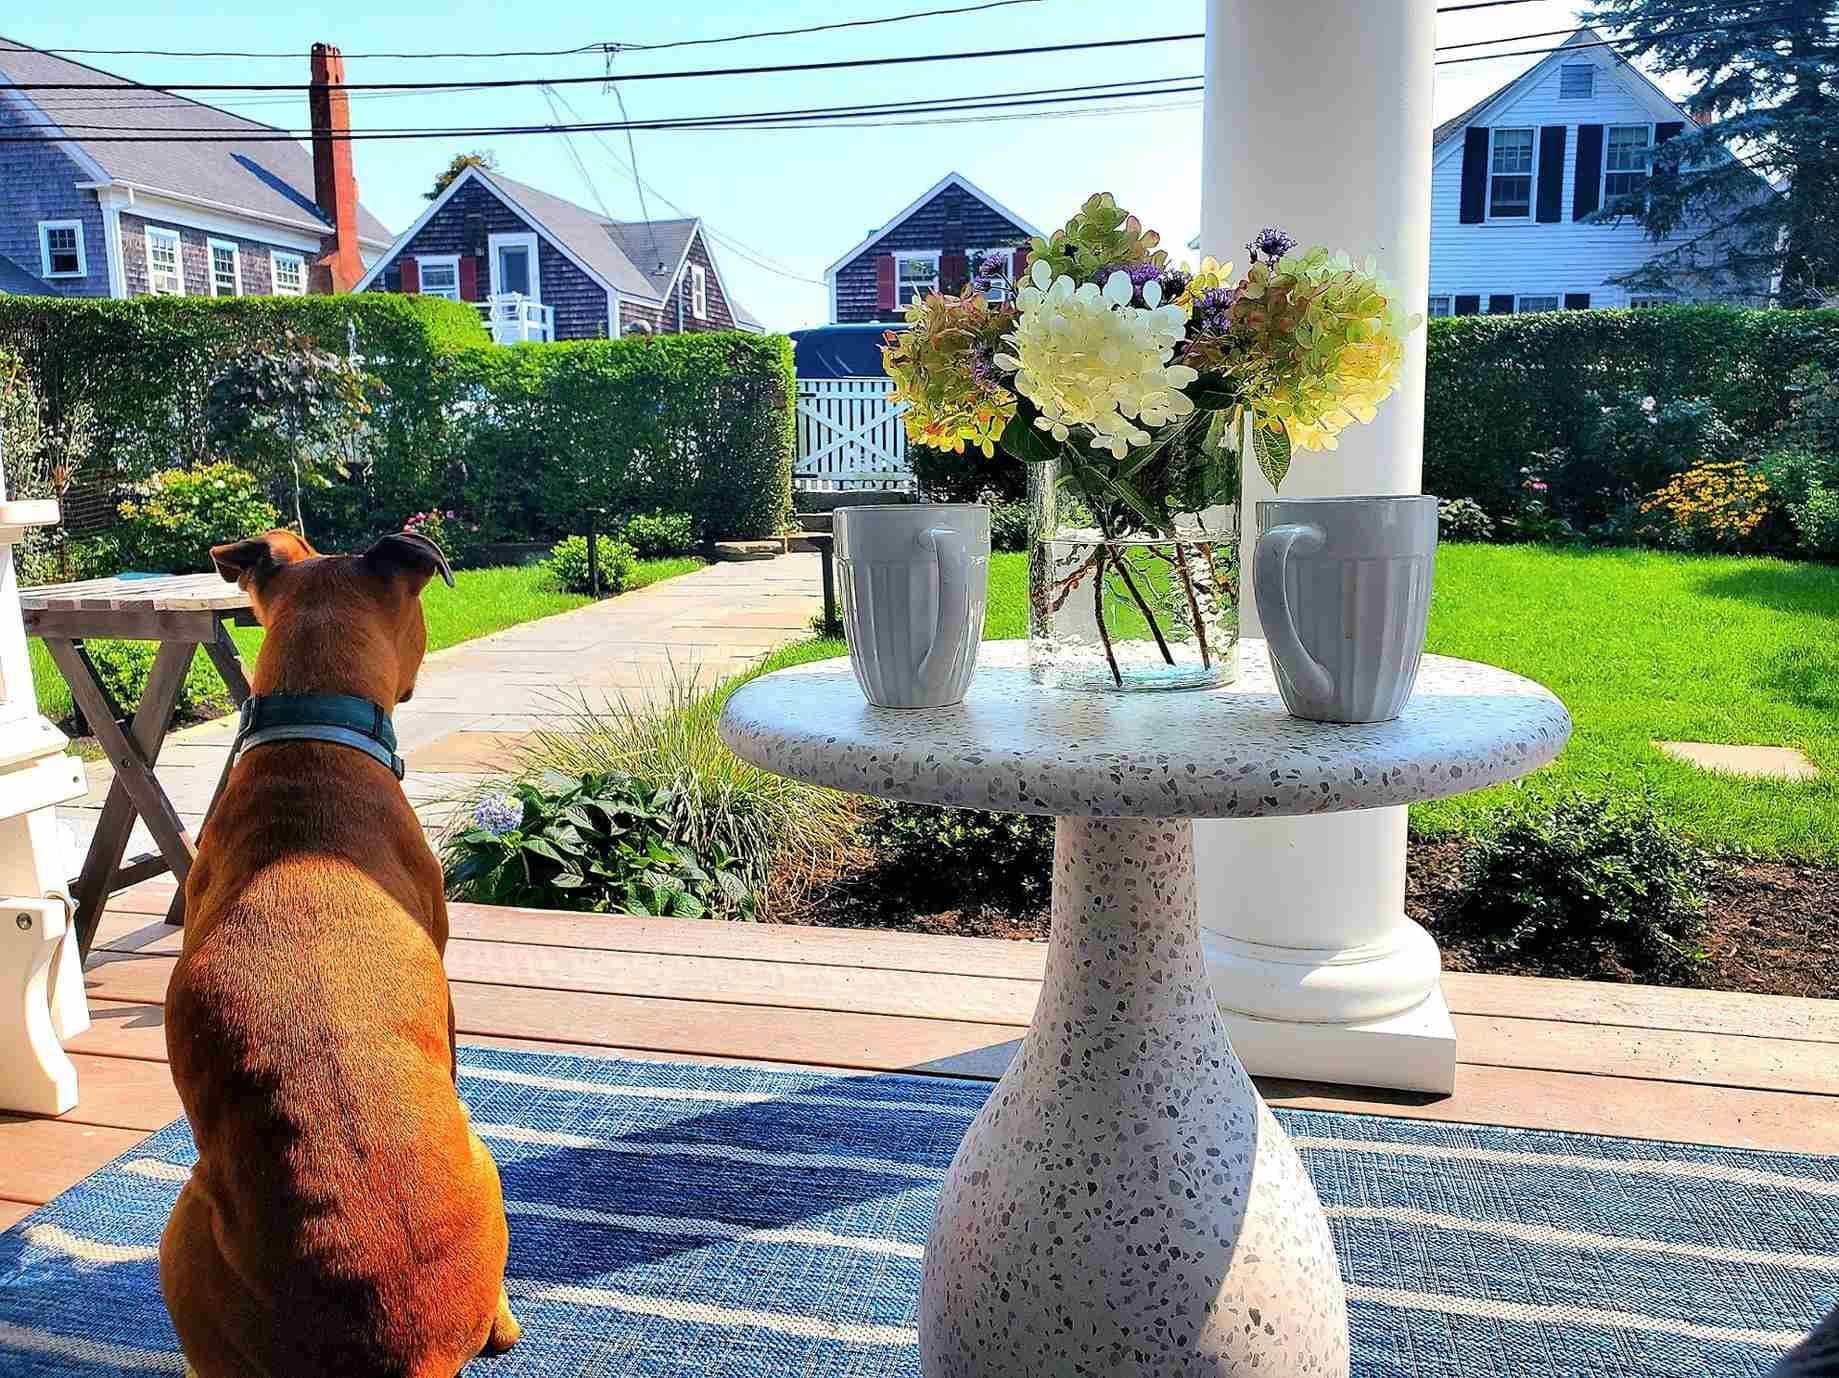 Vacation rental in Provincetown MA